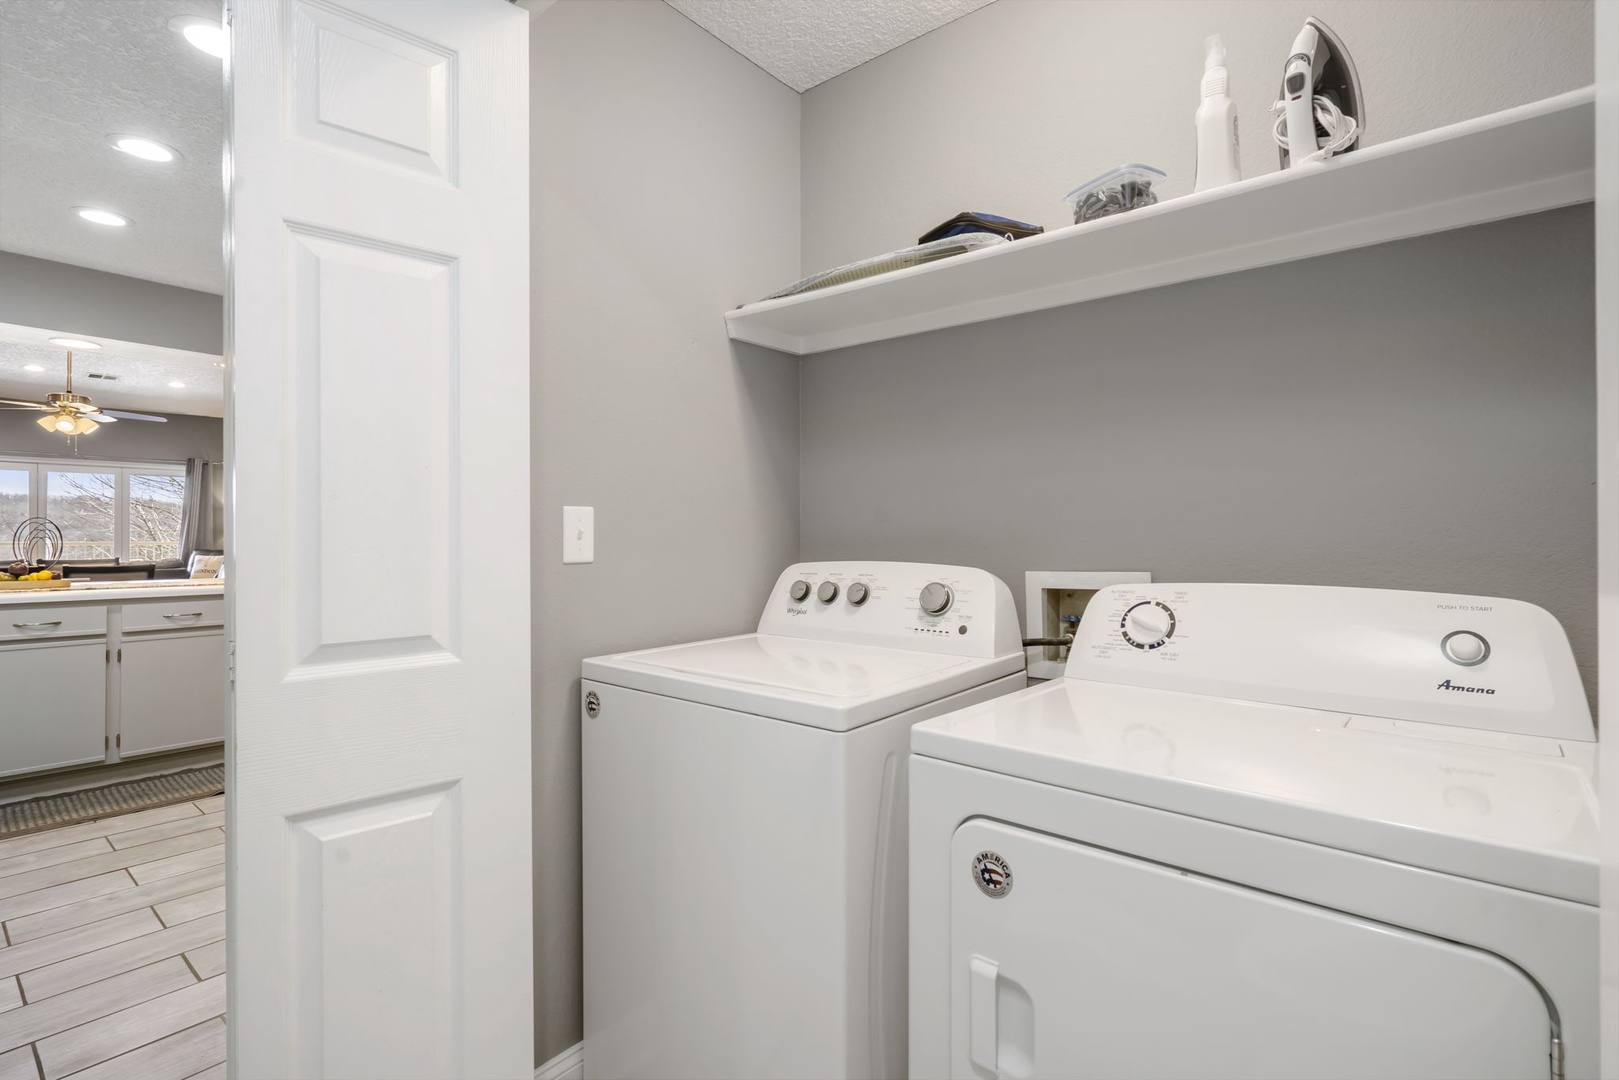 Unit 19: Private laundry is available for your stay, tucked away off the kitchen